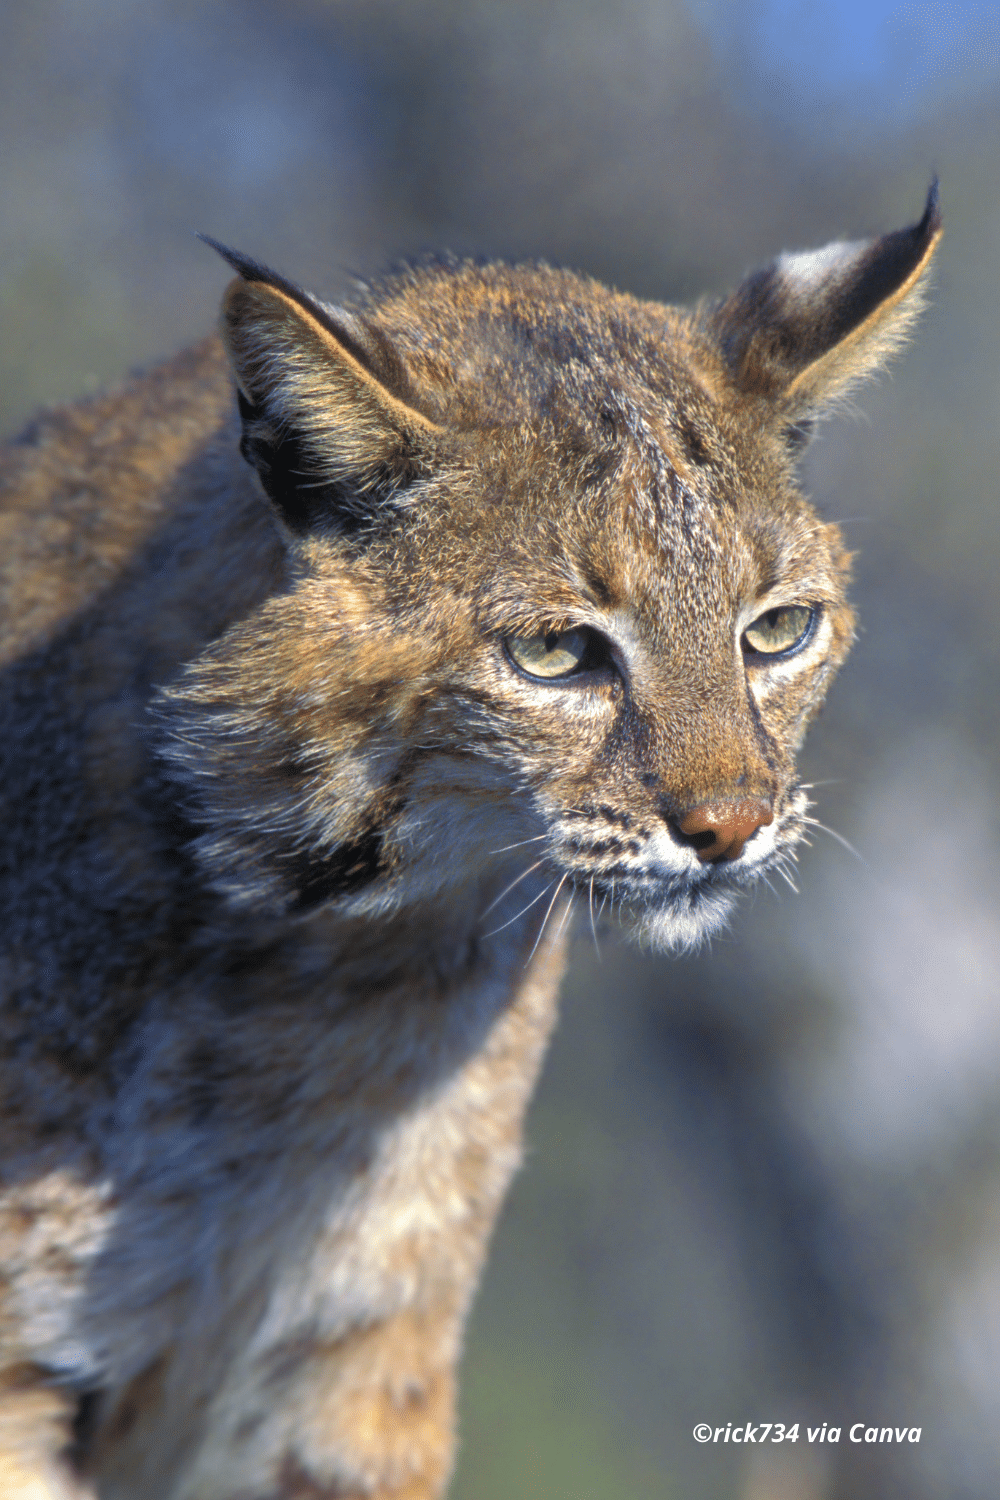 vertical image with a close up photo of a Bobcat with a blurred background